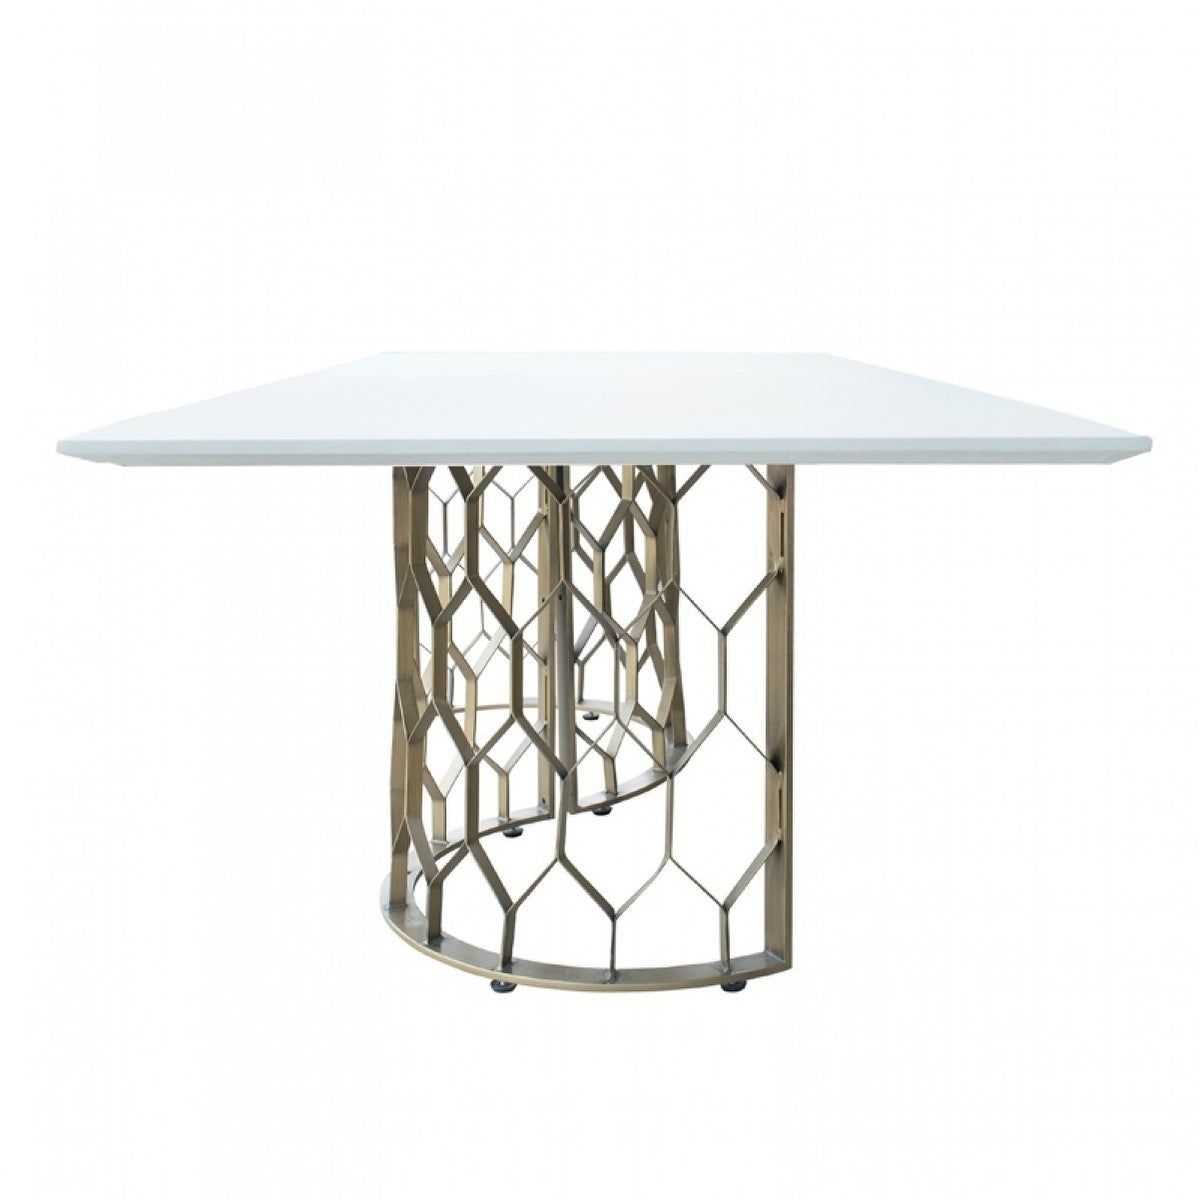 Modrest Faye Modern White Concrete & Antique Brass Dining Table Intended For Recent Faye Dining Tables (View 7 of 25)